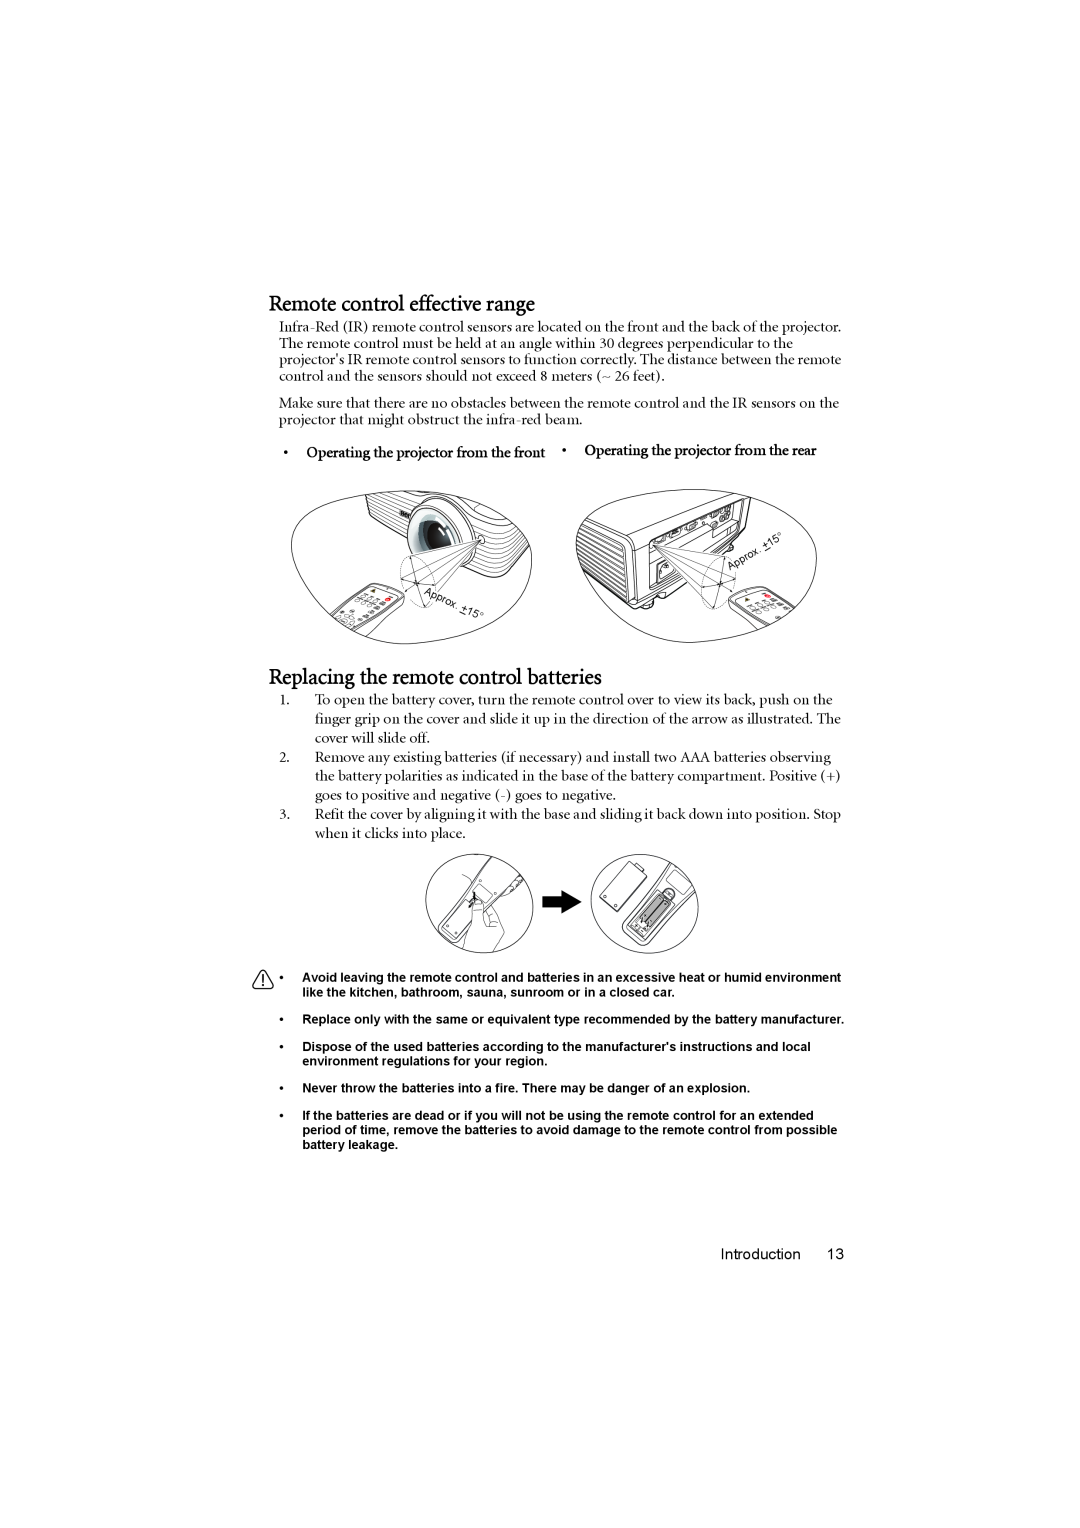 BenQ MP776 ST user manual Remote control effective range, Replacing the remote control batteries 